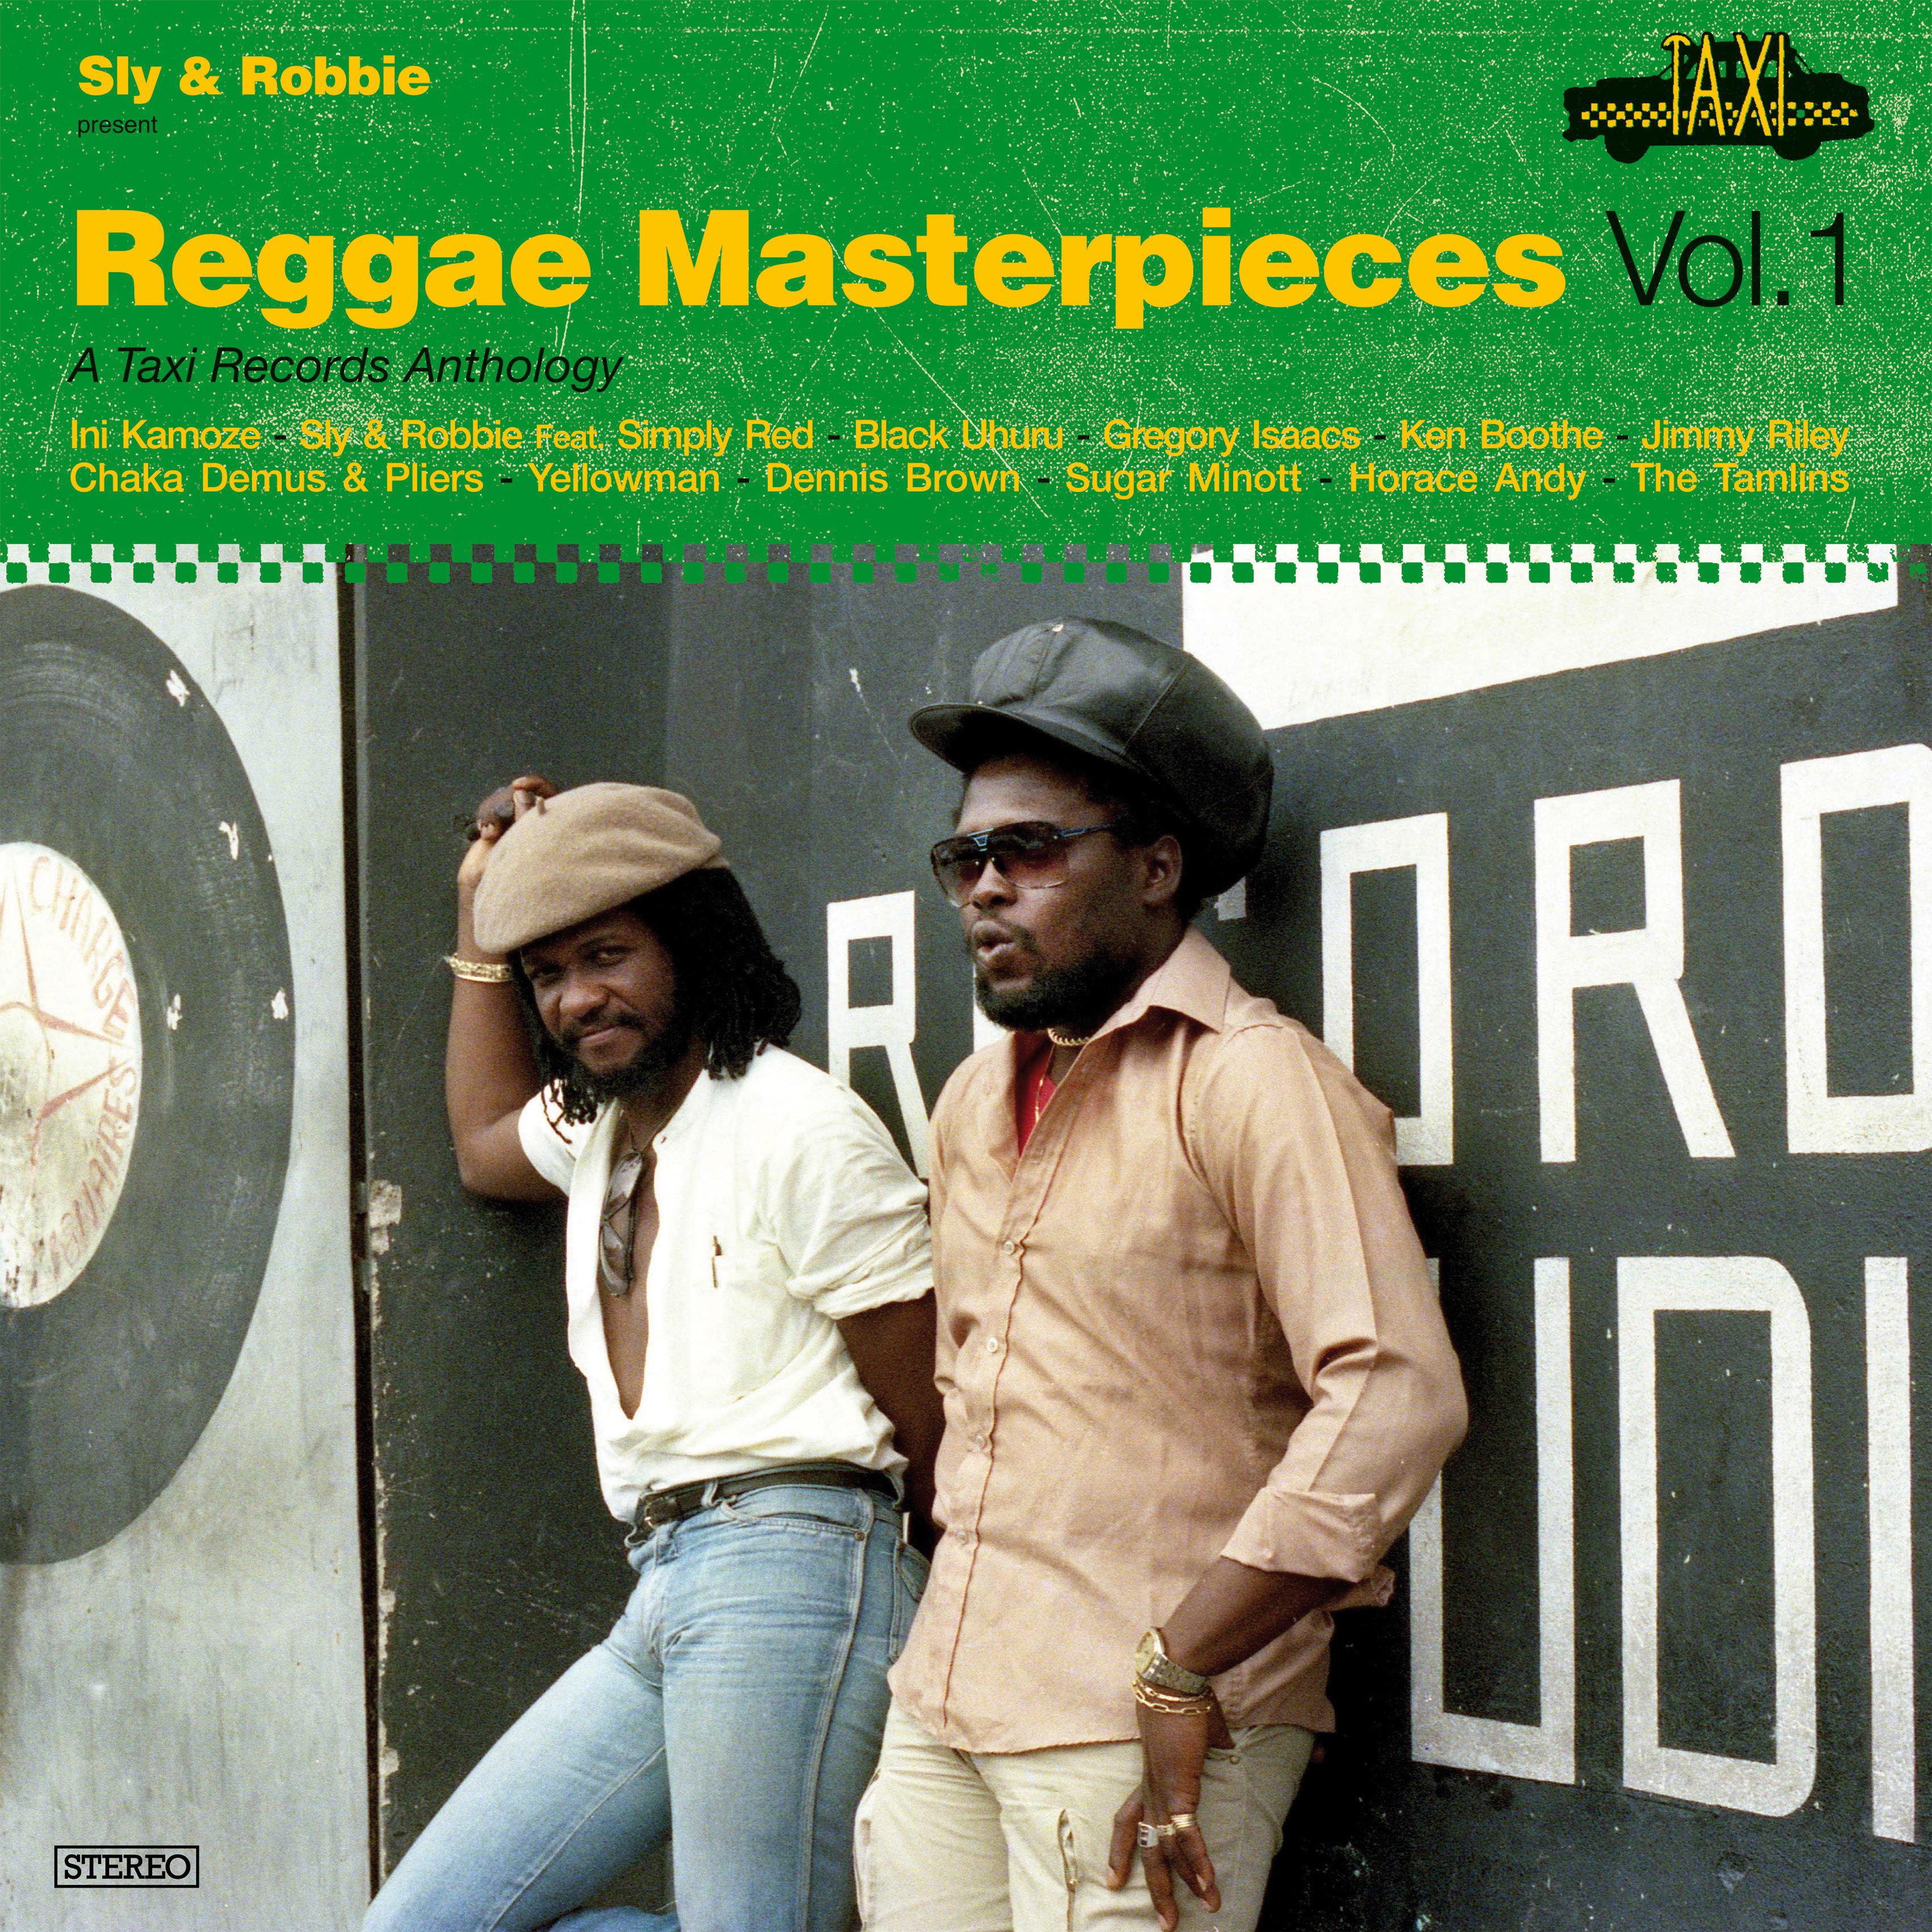 Reggae Masterpieces Vol. 1, A taxi Records Anthology